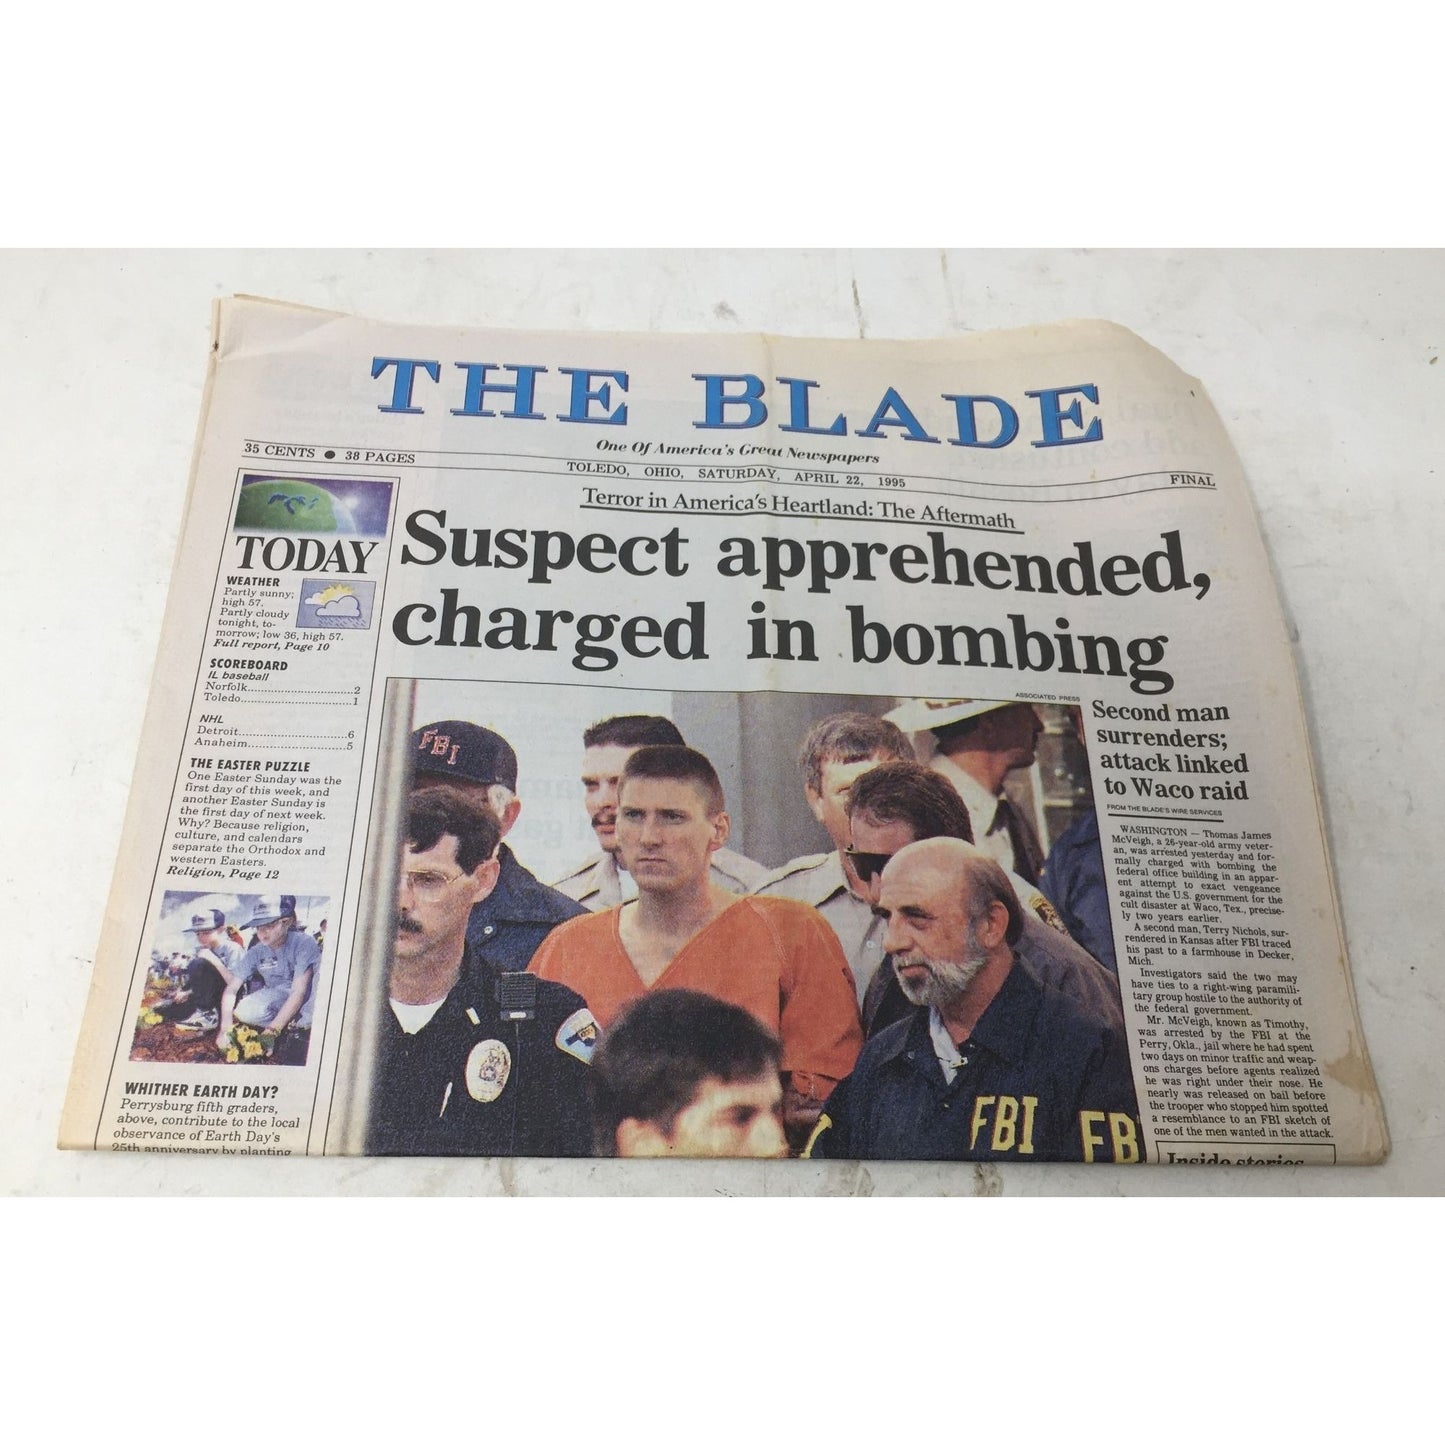 Vintage Collectible Newspaper The Blade April 22, 1995